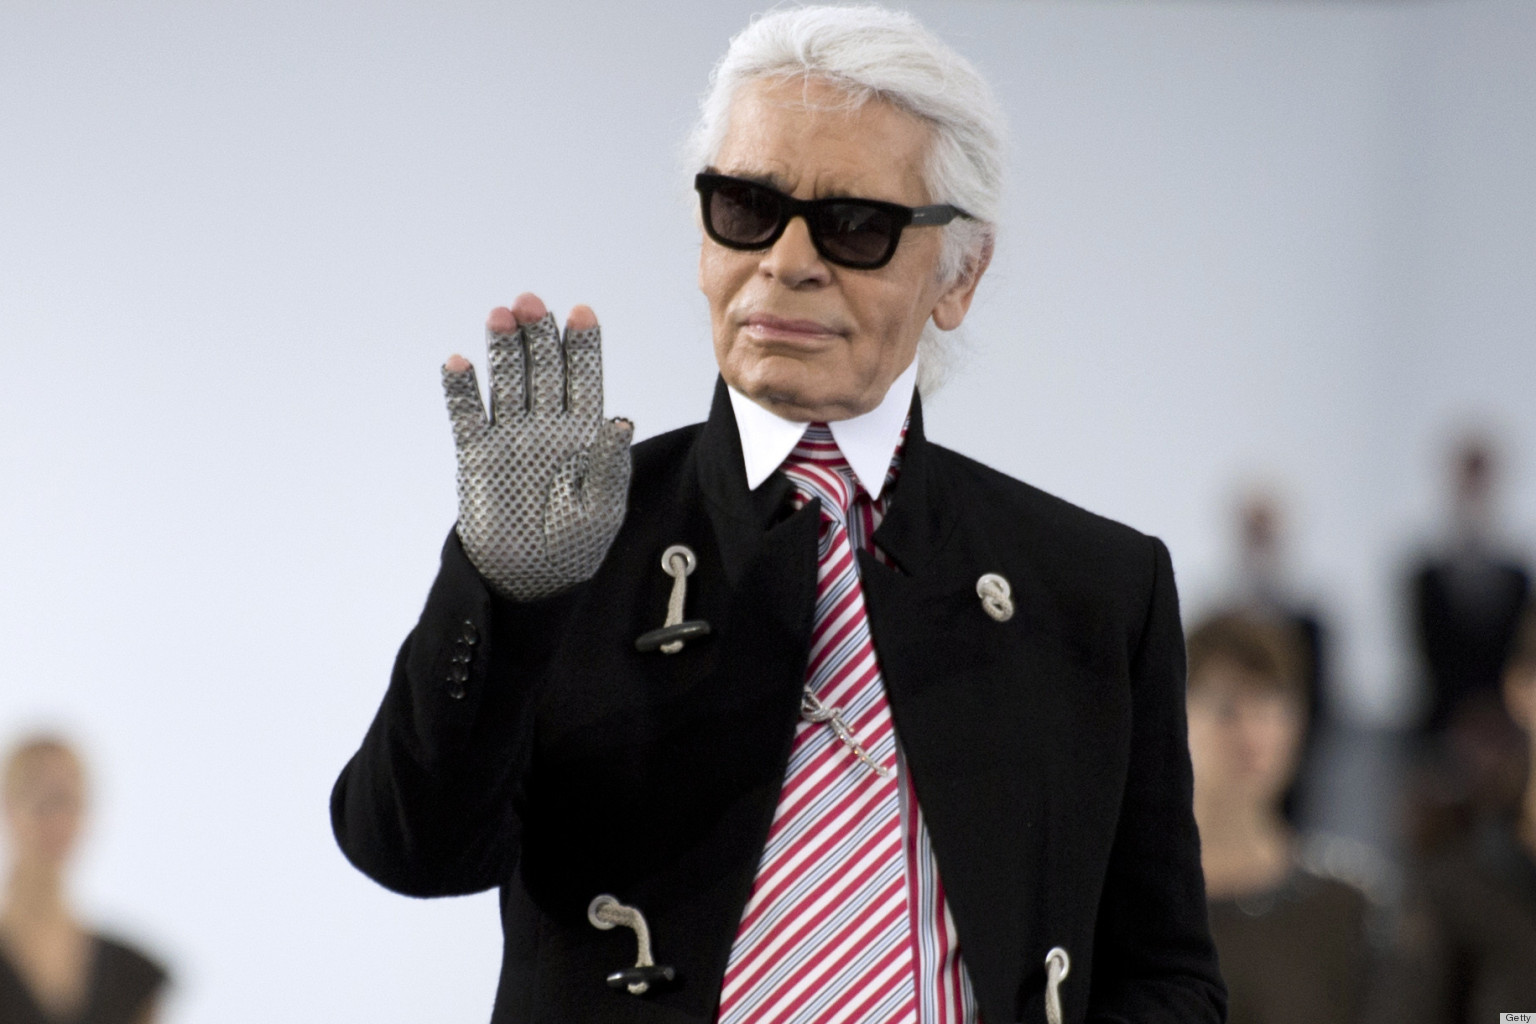 German fashion designer Karl Lagerfeld for Chanel acknowledges the public at the end of the Spring/Summer 2013 ready-to-wear collection show on October 2, 2012 at the Grand Palais in Paris. AFP PHOTO/MARTIN BUREAU (Photo credit should read MARTIN BUREAU/AFP/GettyImages)